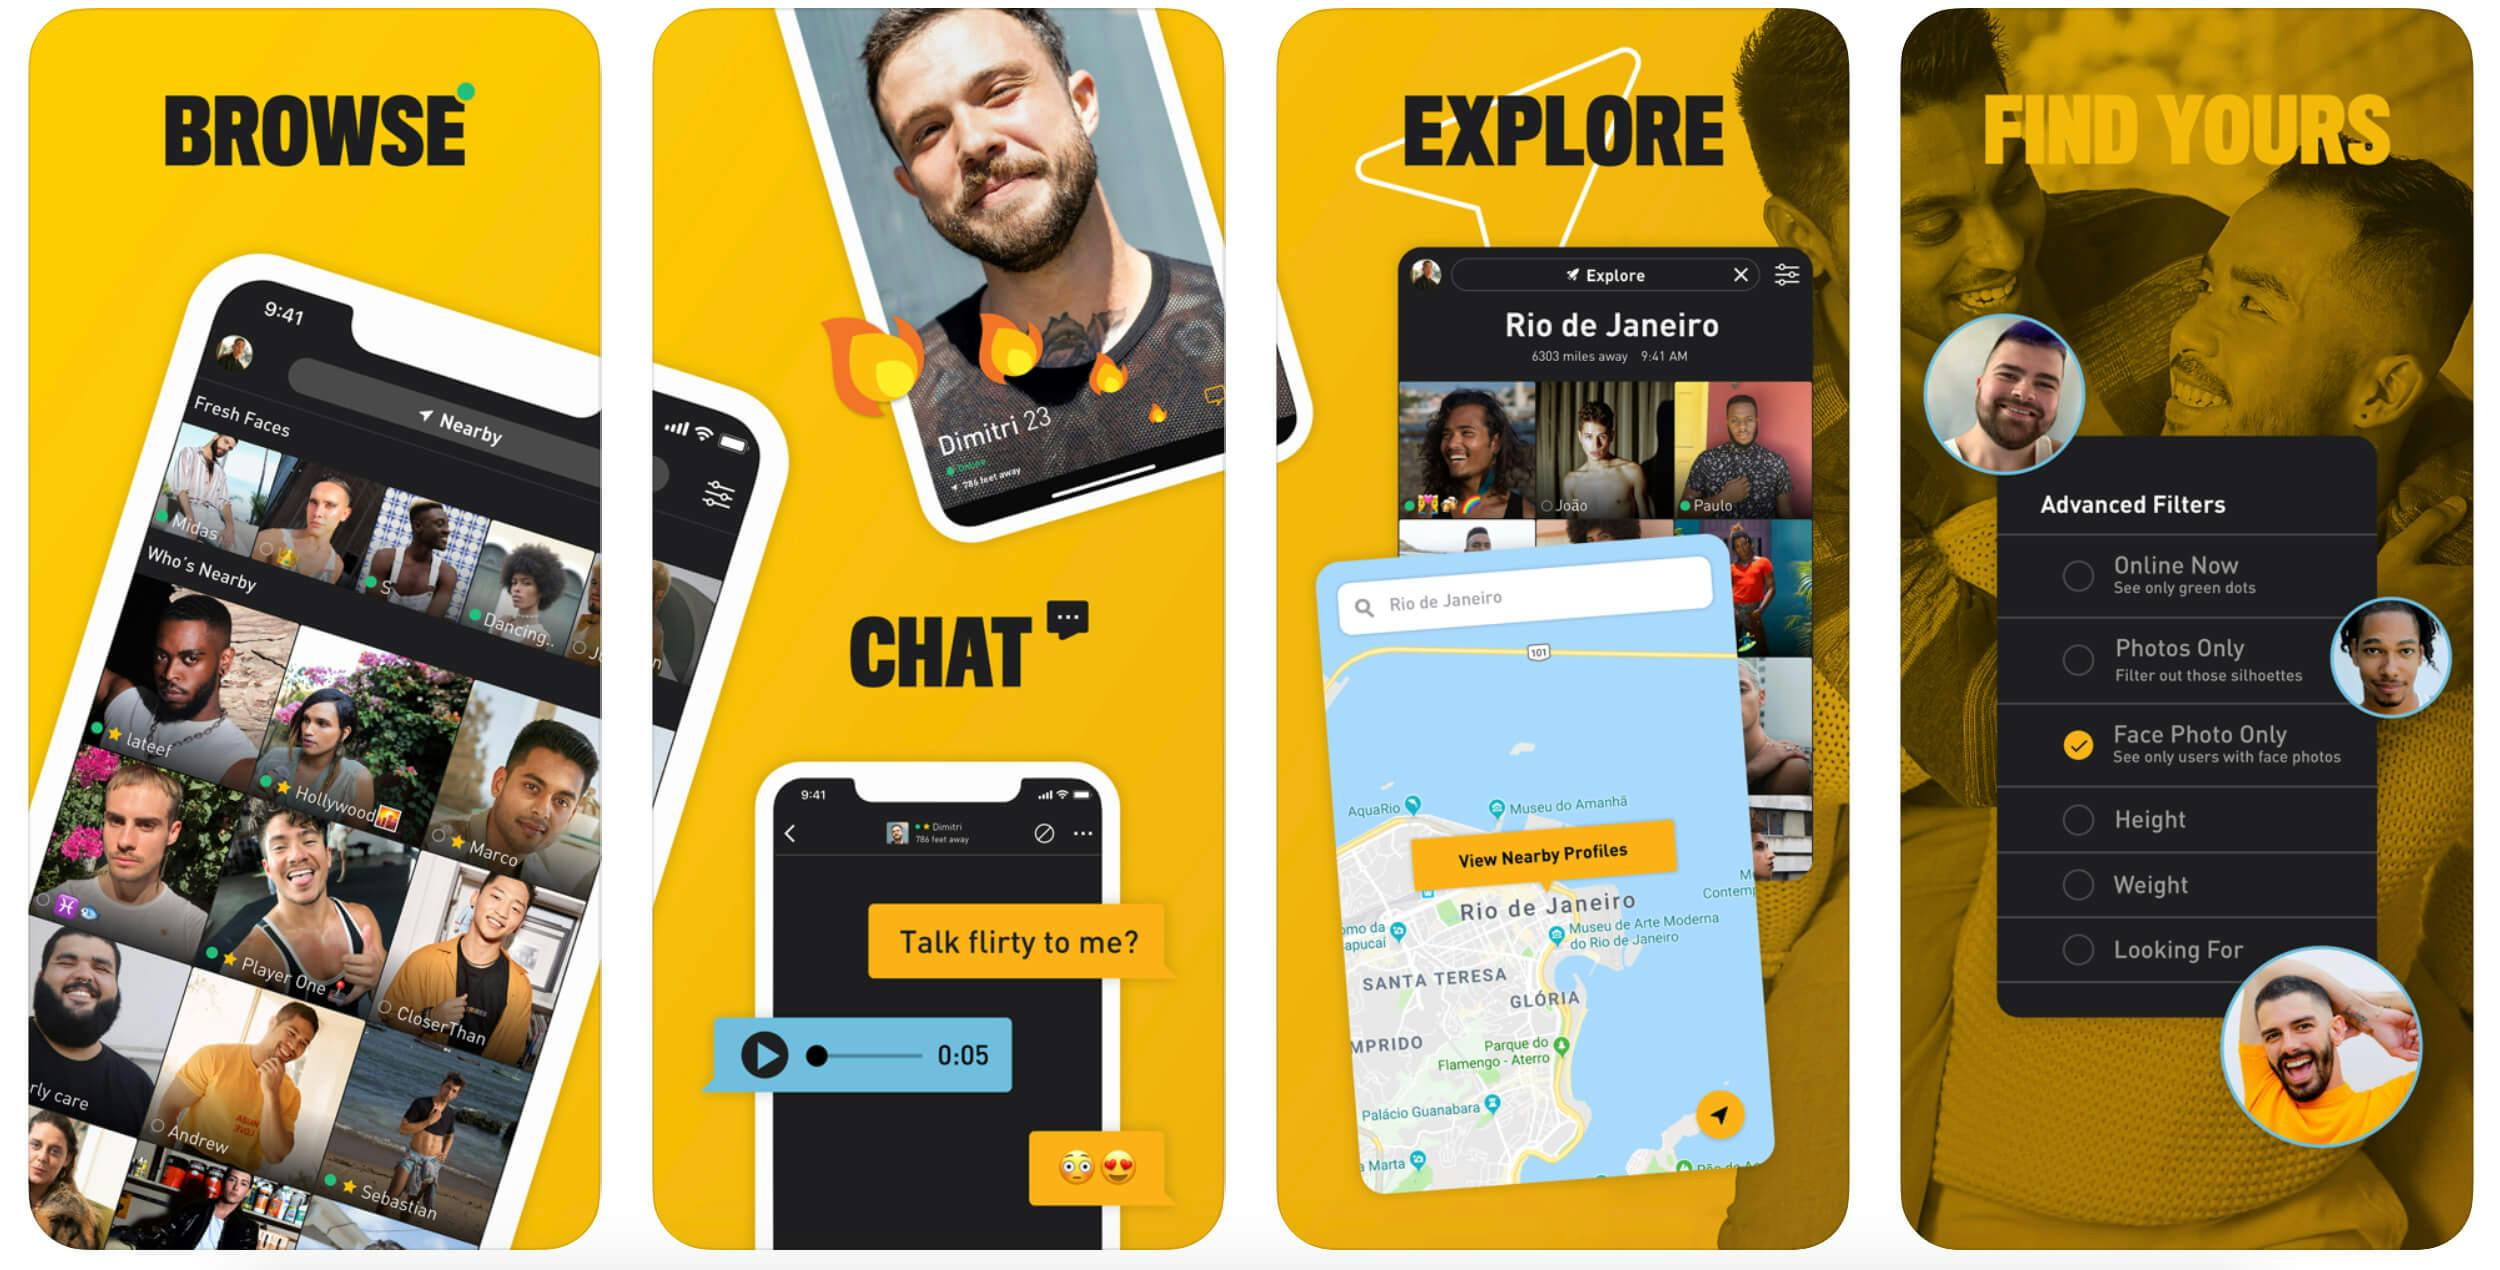 Screenshot of Grindr profile interface and chat features.